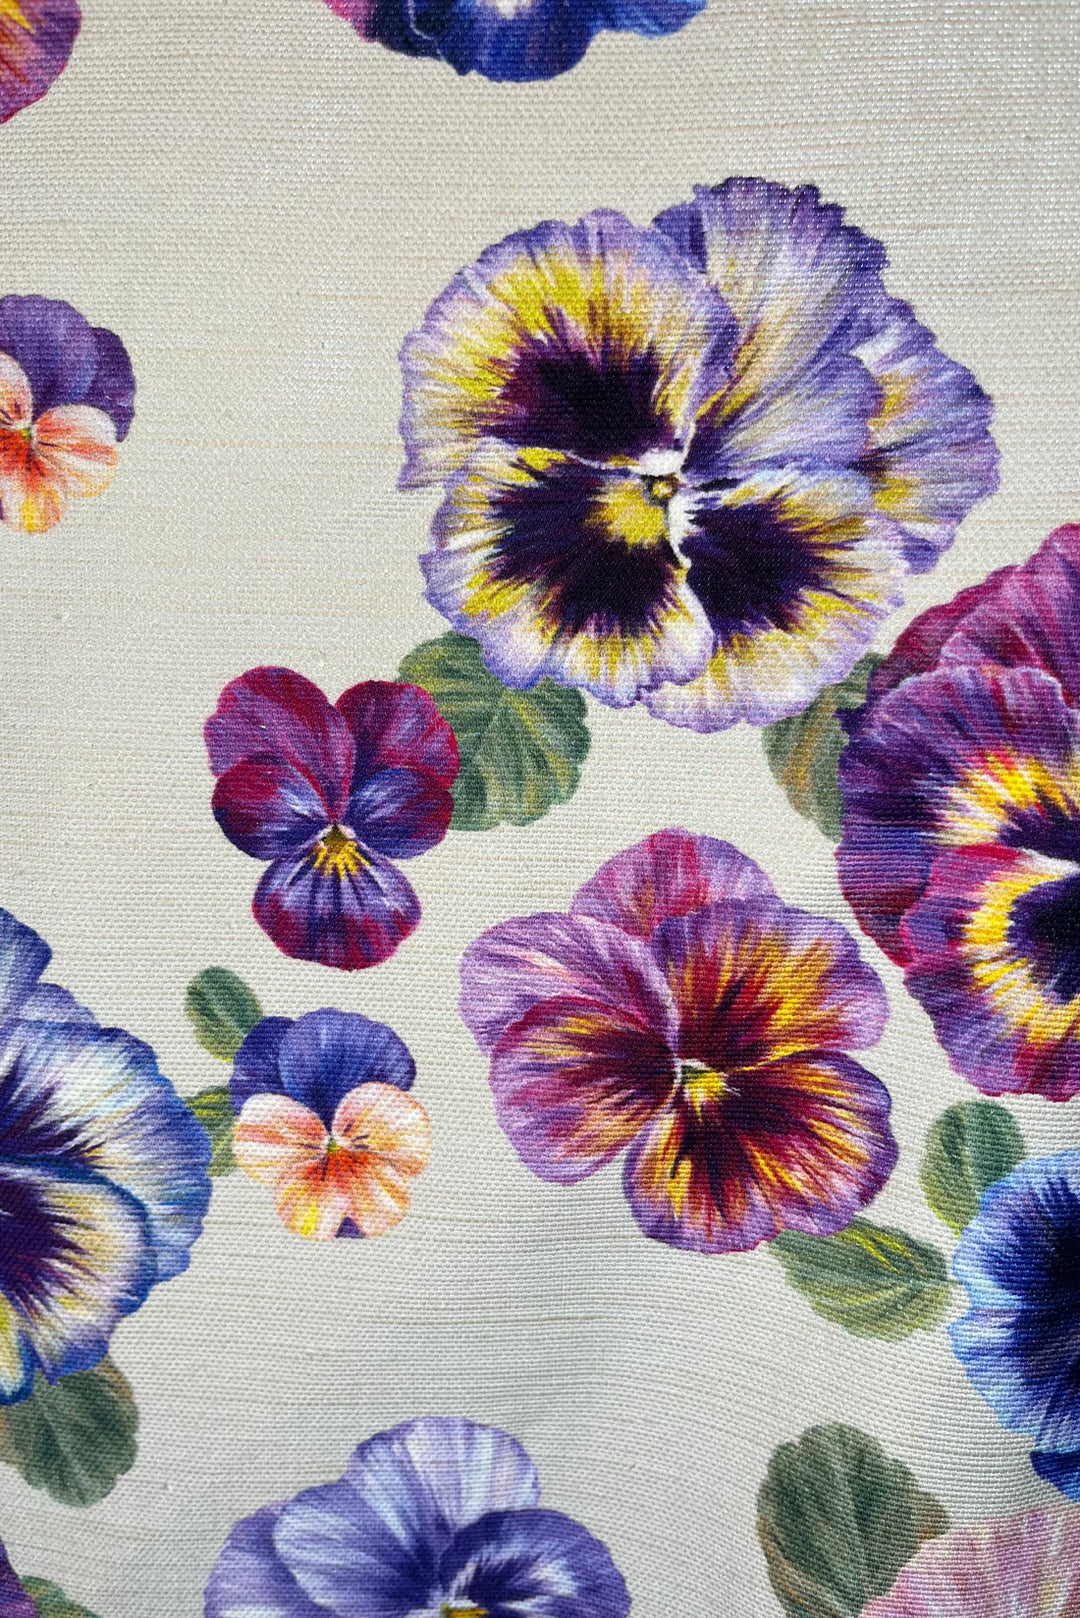 Victoria-sanders-fabrics-plethora-of-pansies-ston-background-hand-painted-floral-oyster-linen-textile